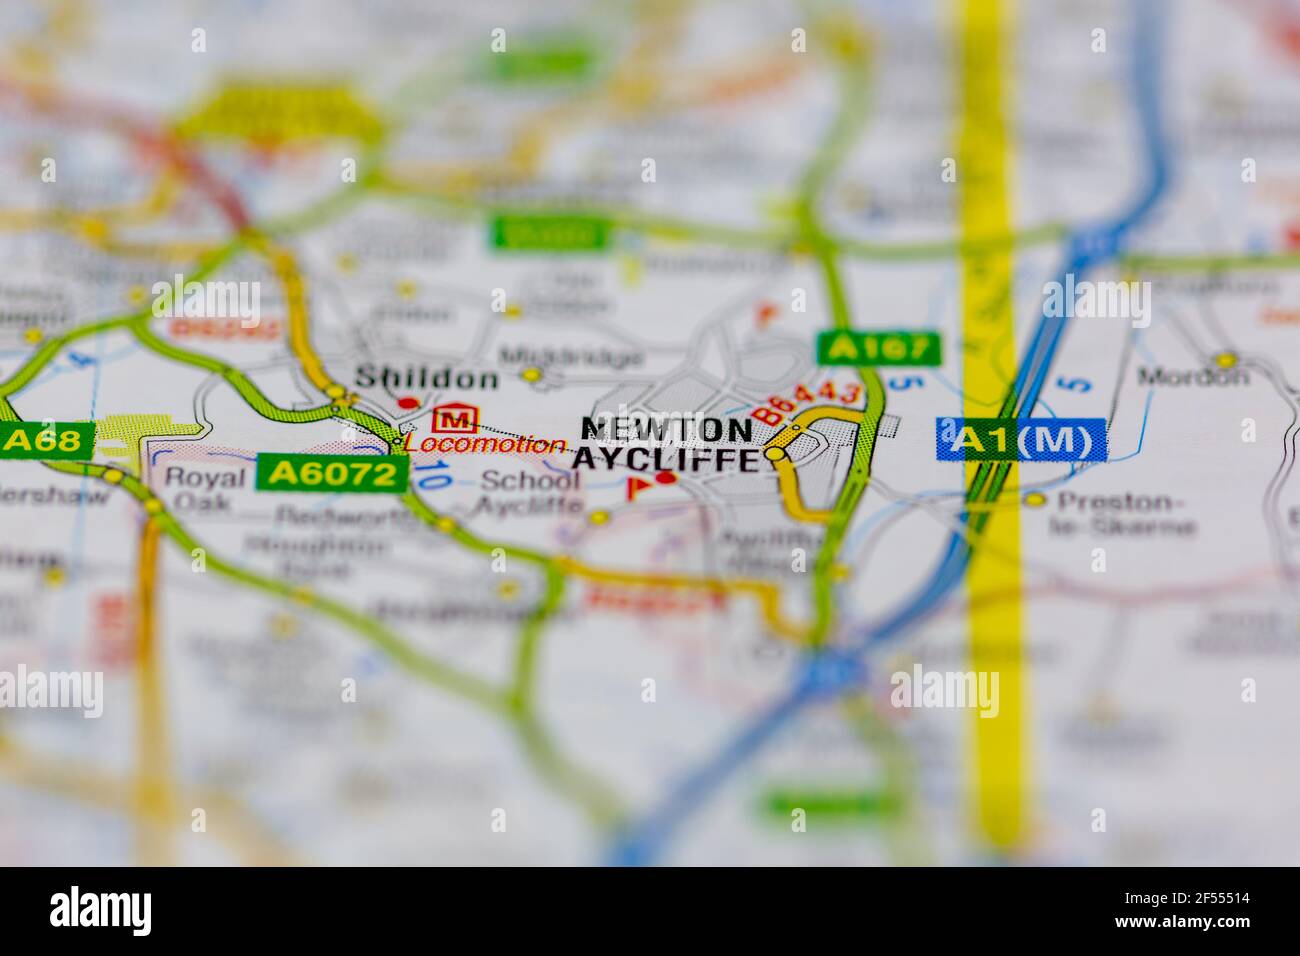 Newton Aycliffe Shown on a Geography map or road map Stock Photo